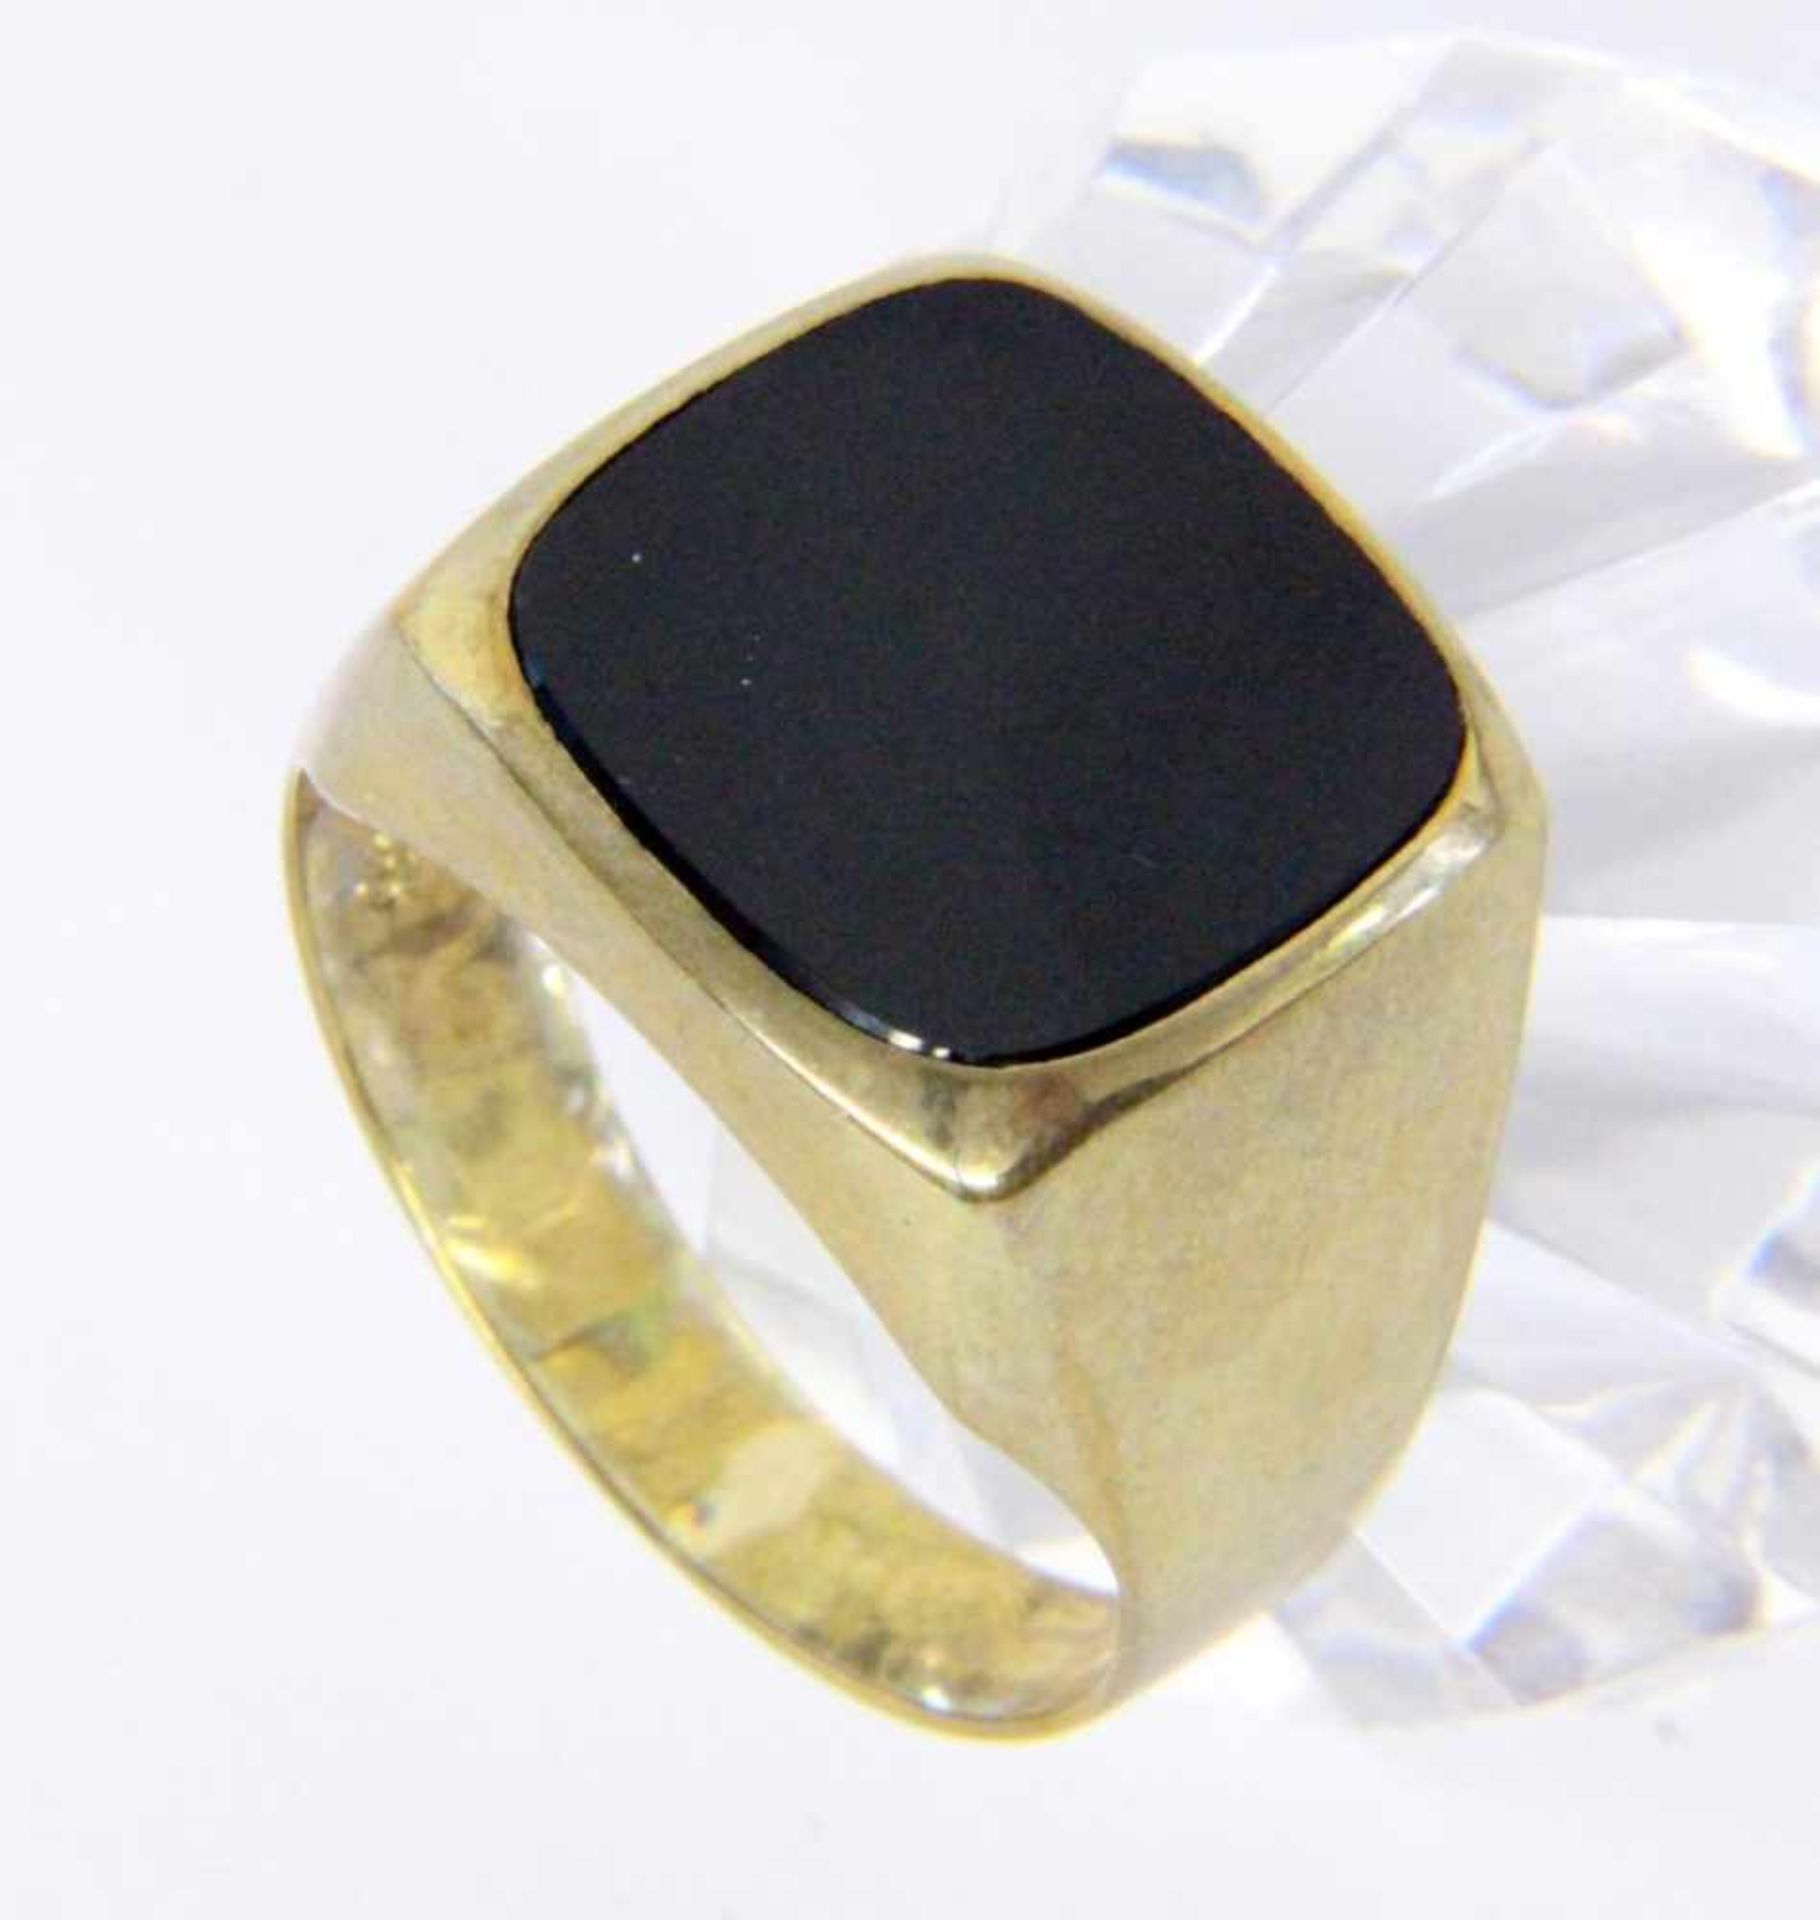 A MEN'S RING 333/000 yellow gold with onyx. Ring size 65, gross weight approximately 5.7grams.